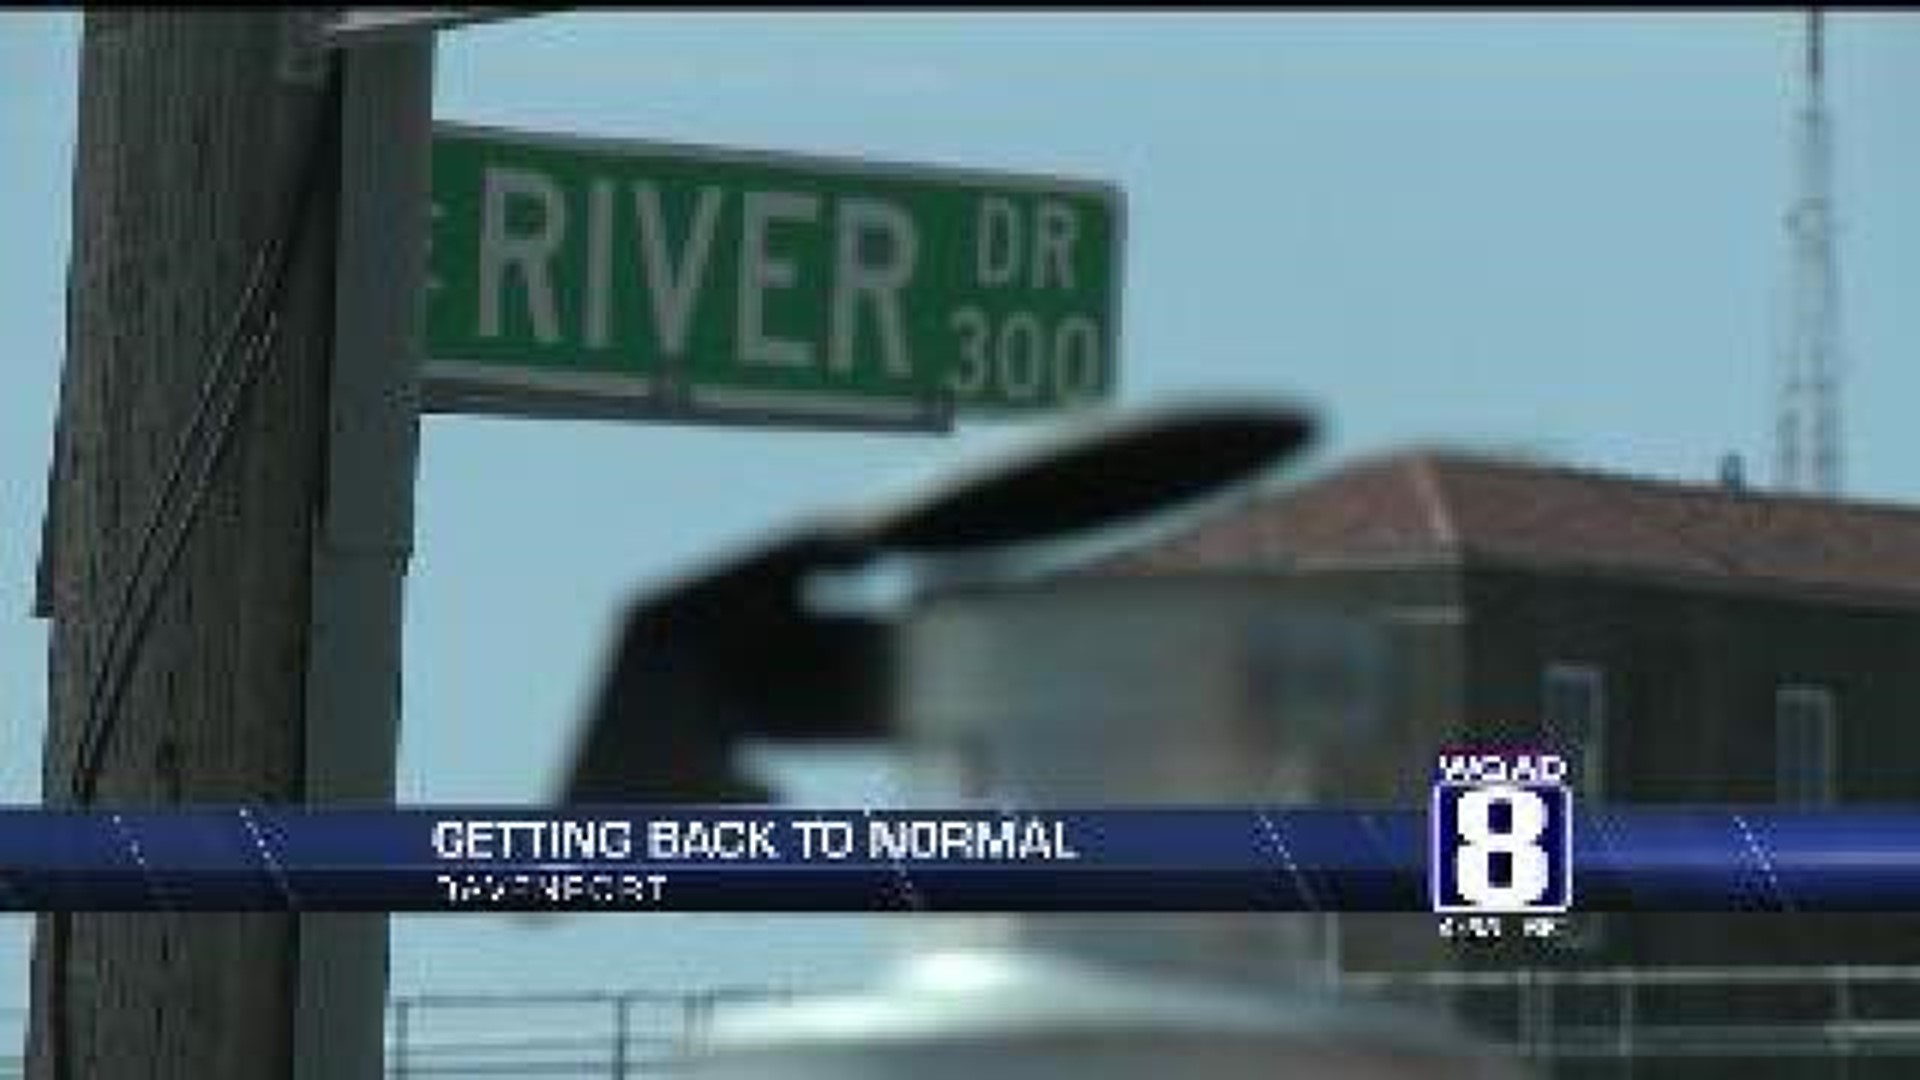 Downtown Davenport getting back to normal